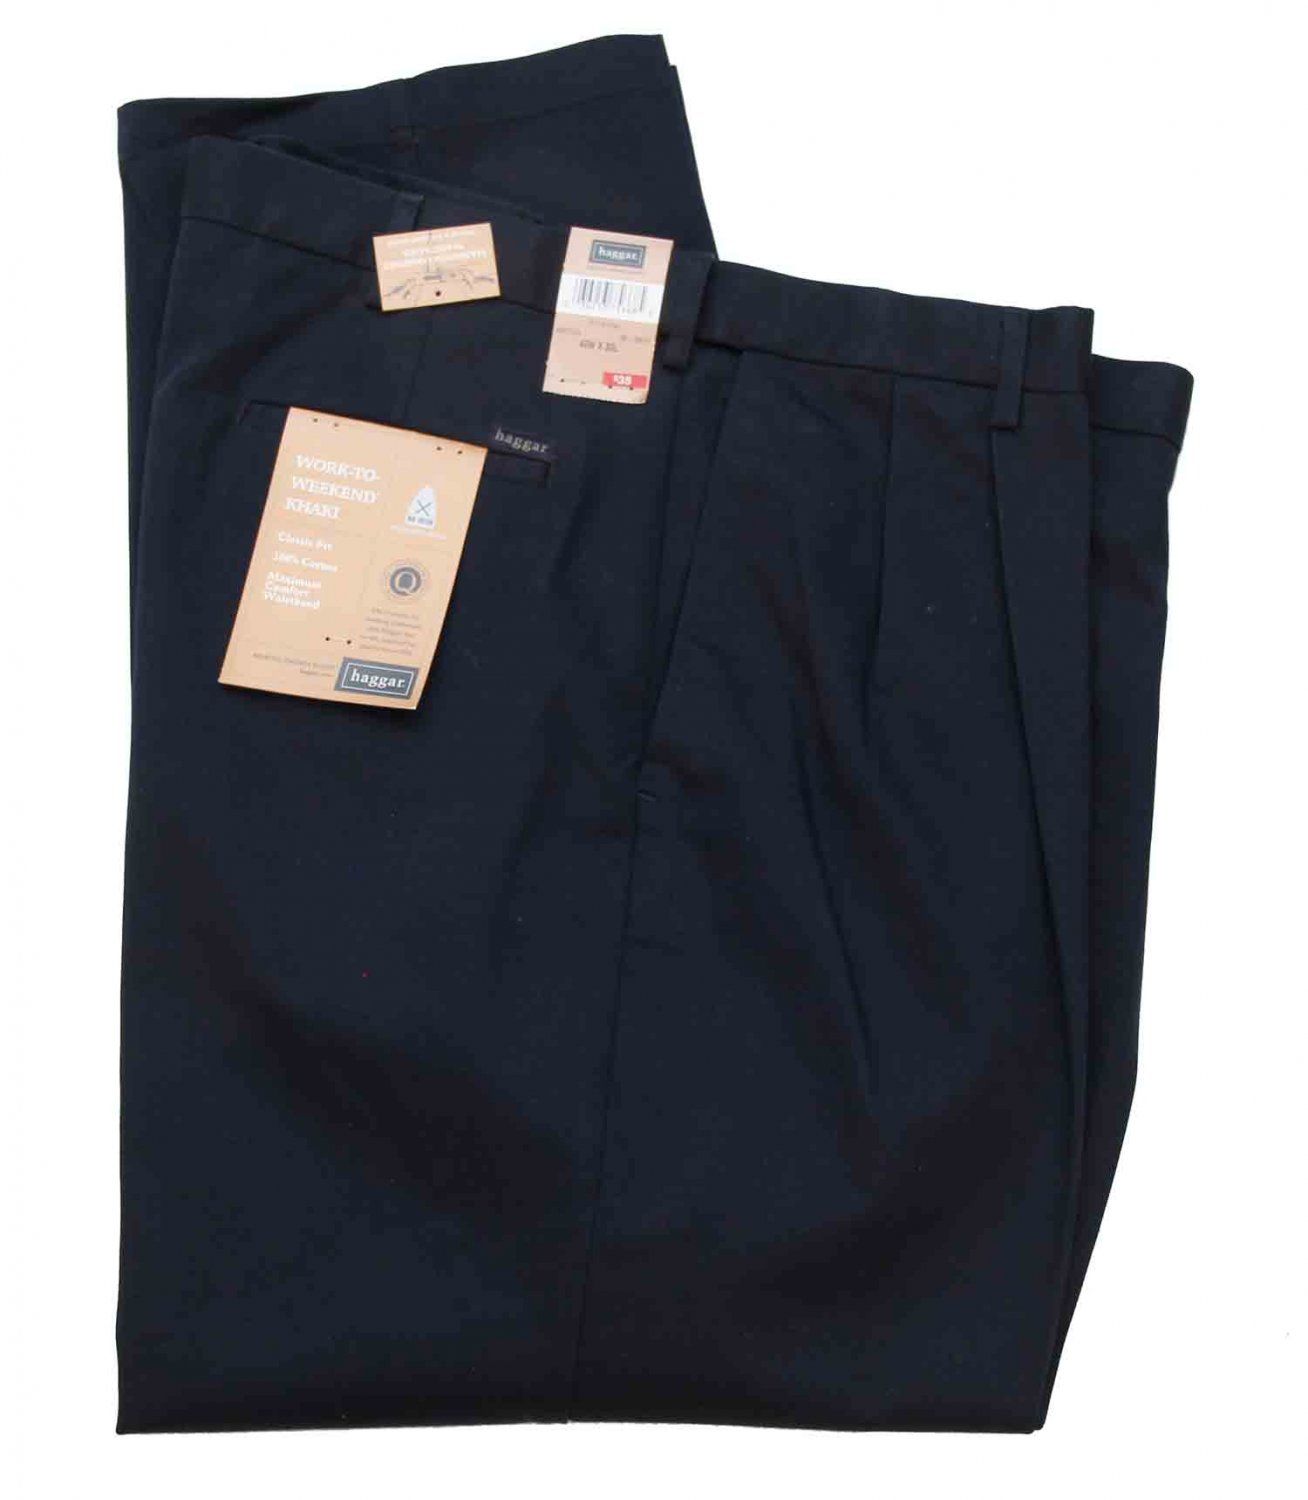 Haggar Work-To-Weekend Chinos Pants Khakis Navy Blue Pleated No-Iron ...